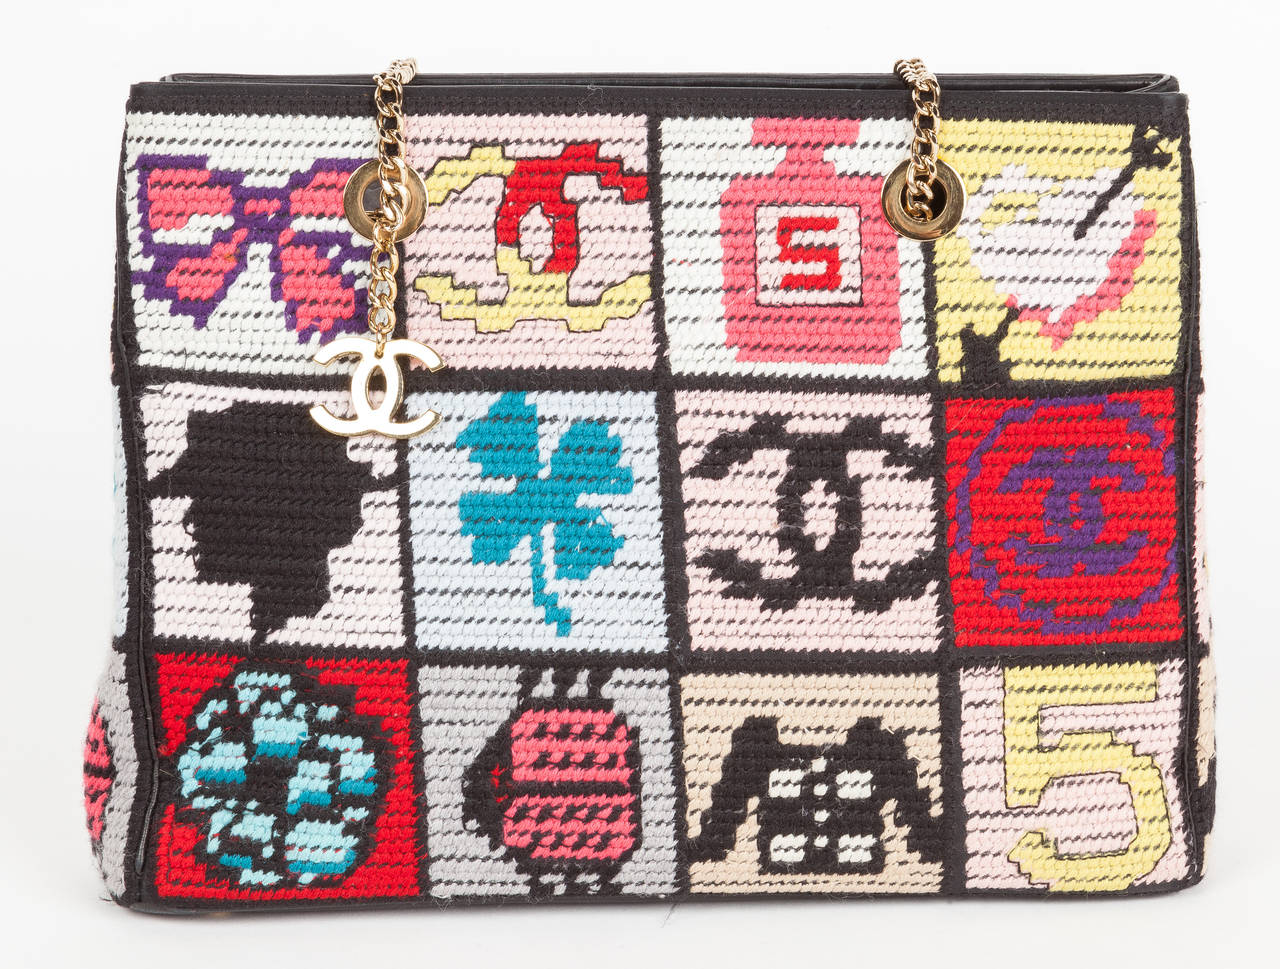 A Chanel “Precious Symbols” shoulder bag crafted from colorful needlepoint squares depicting classic and iconic Chanel symbols. The bag has gold chain link shoulder straps with a hanging gold Chanel CC charm, black leather bottom with four metal